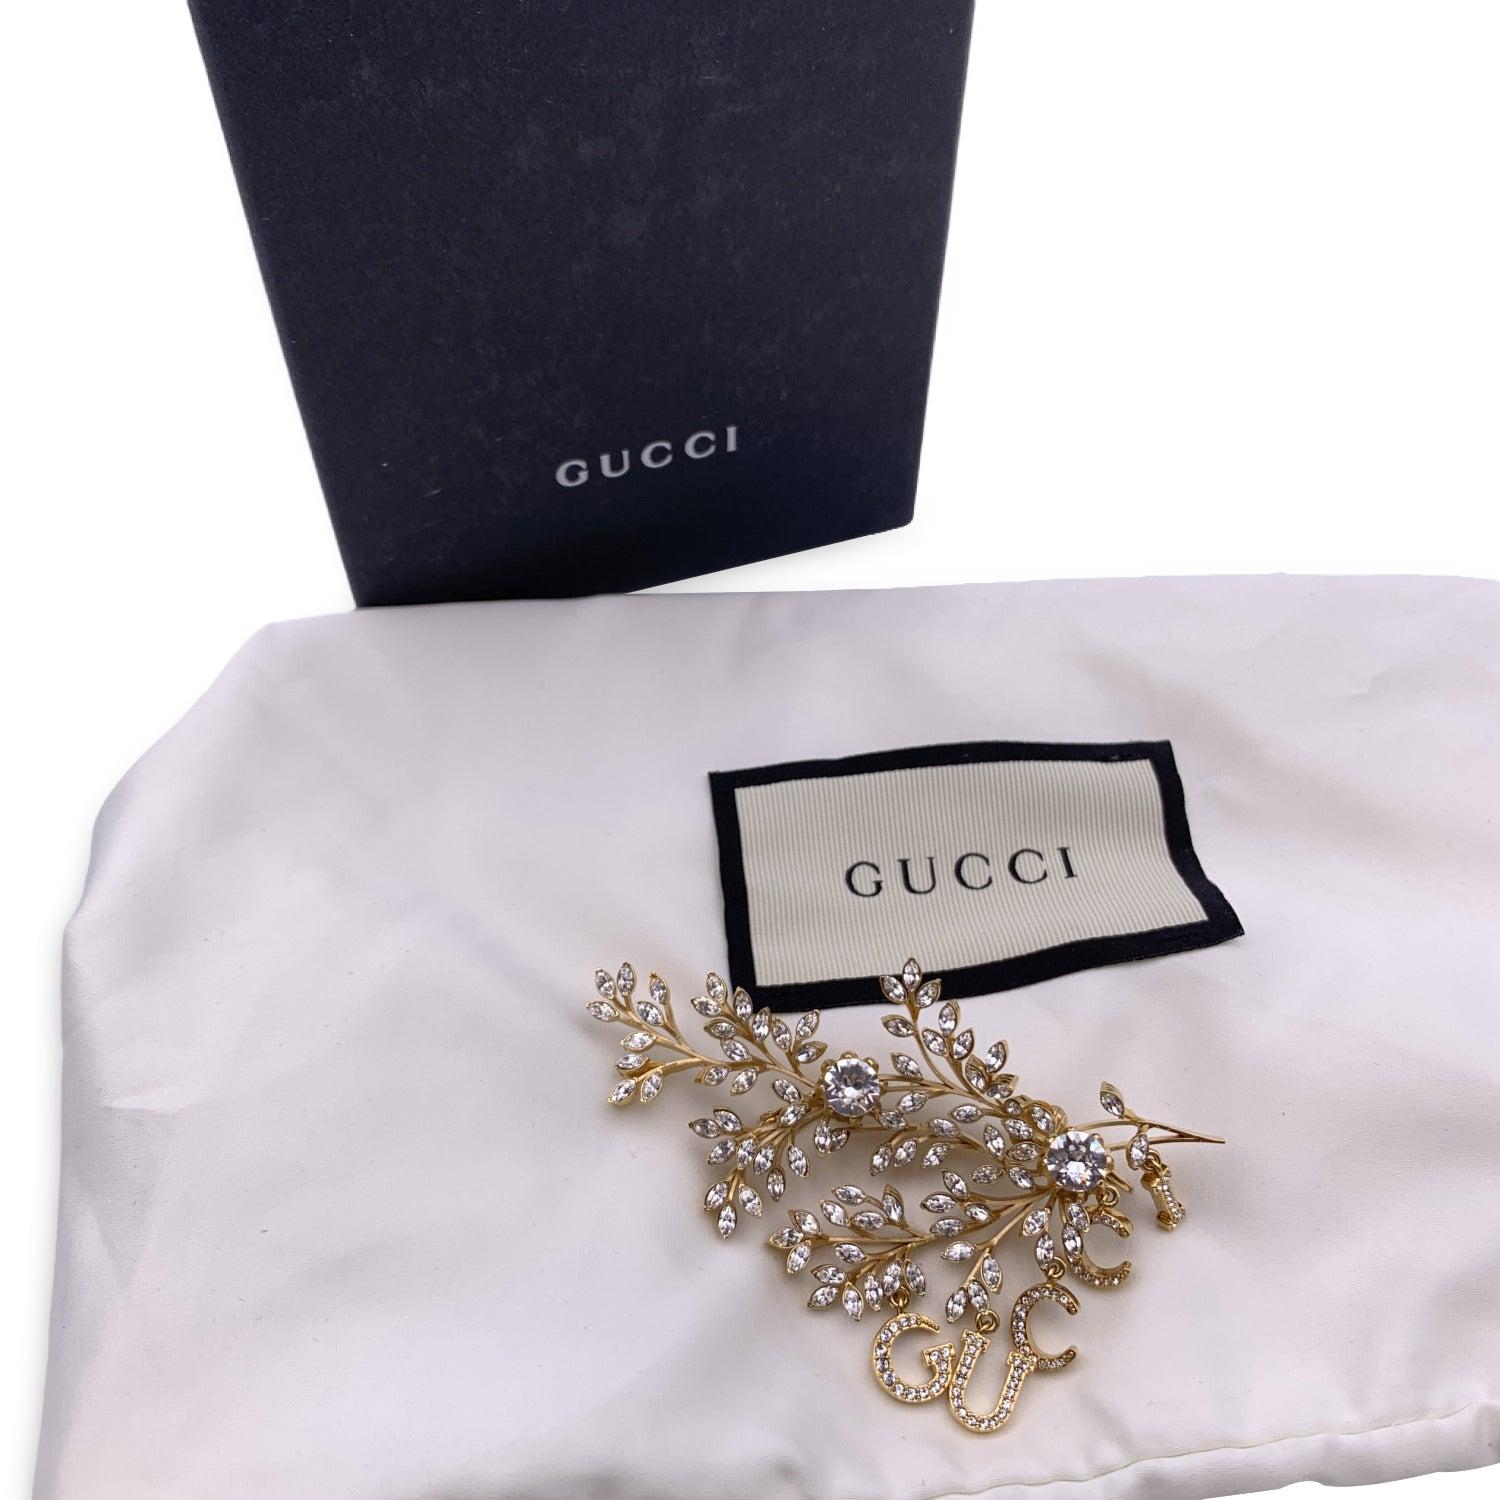 Beautiful GUCCI single gold metal earring / ear cuff with crystals. Dangling Gucci script. Double clip on the back. Total length: 3.5 inches - 8.9 cm. Retail price is 850 euros Condition A+ - MINT Gucci box and pouch included. Please, look carefully